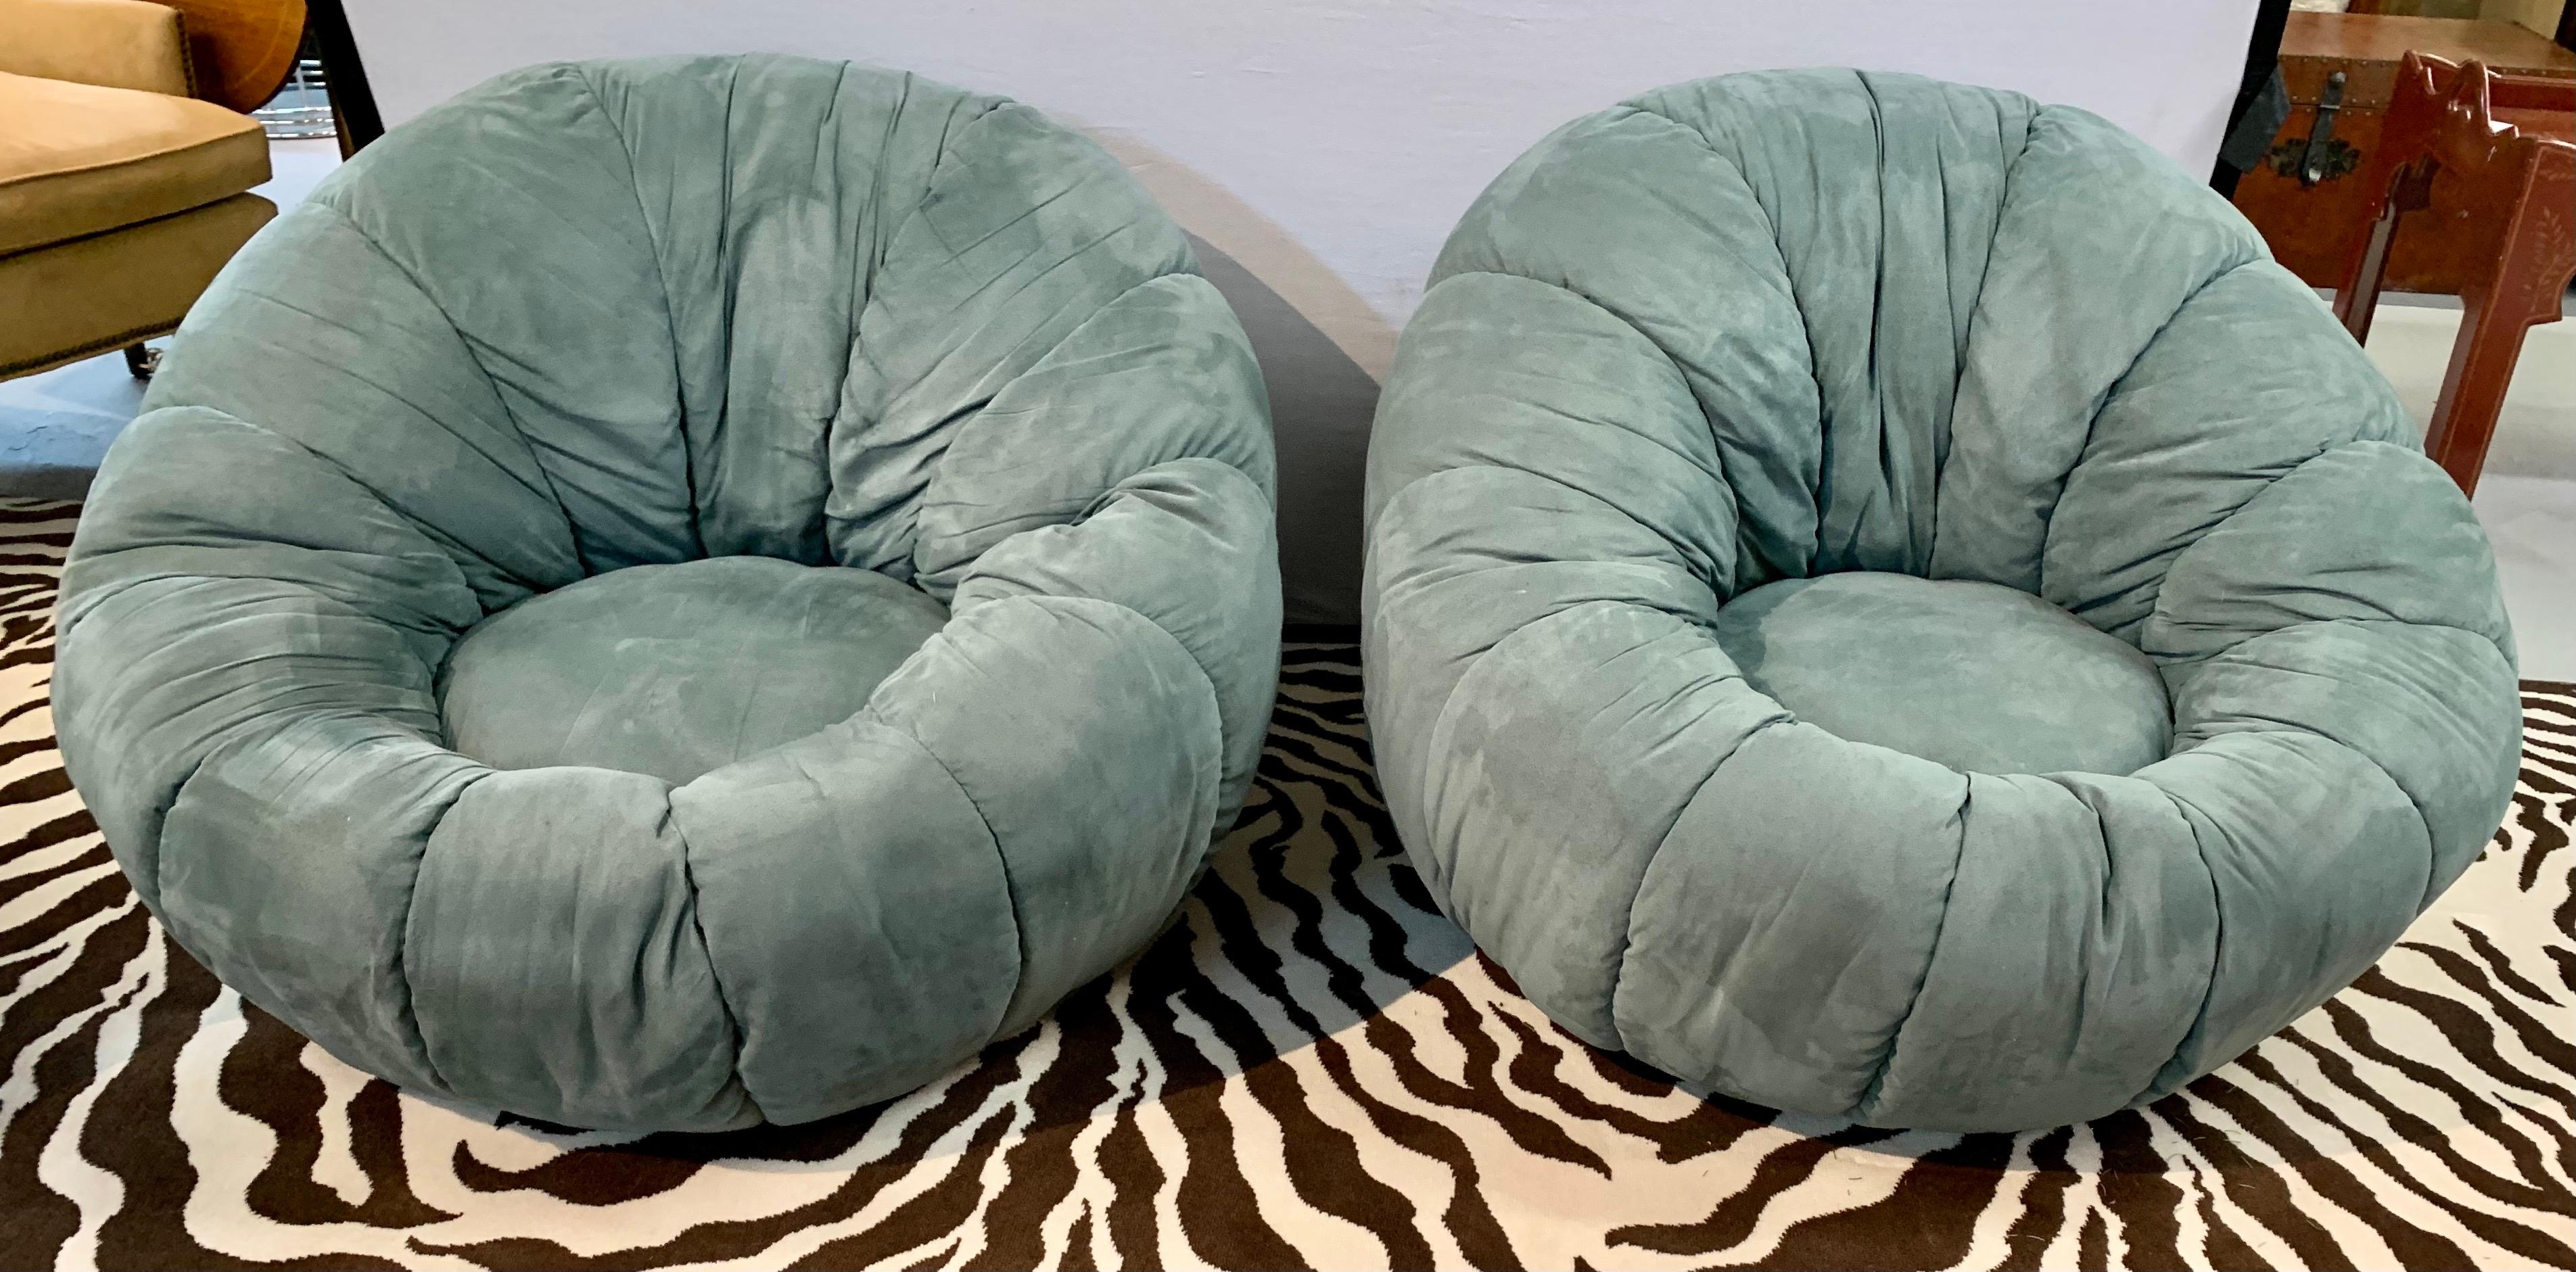 Rare pair of Post Modern round lounge chairs that match and have zippers at back. Great scale and better lines. Exceptional comfort. Fabric feels like suede leather by we believe it to be a microfiber, ableit a high quality one. Own the best.
 